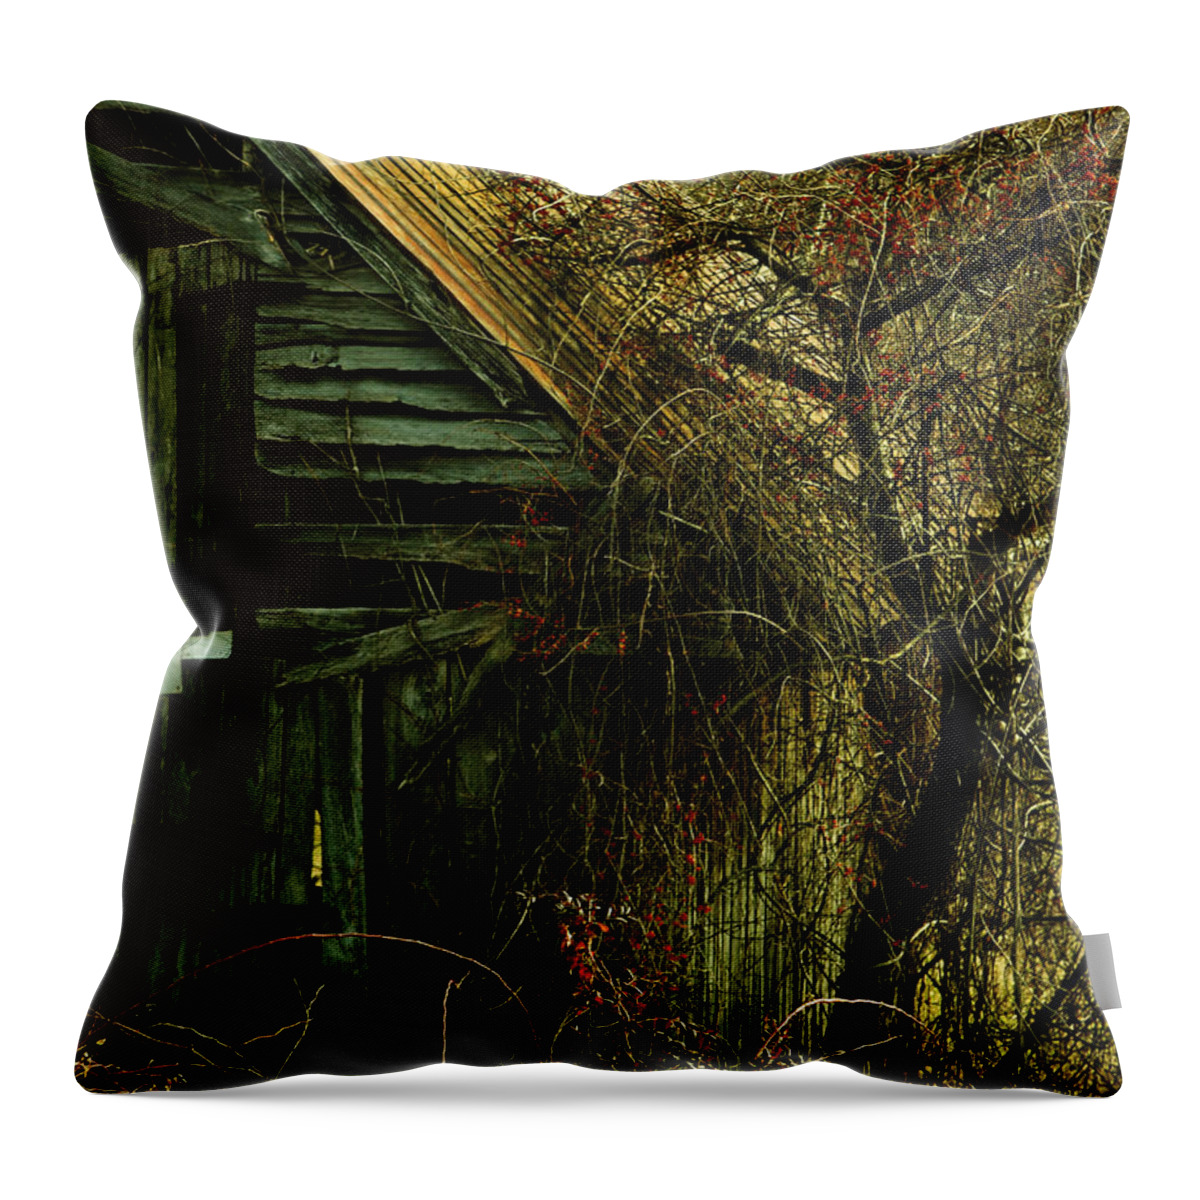 Barn Throw Pillow featuring the photograph There Will Come Soft Rains by Rebecca Sherman